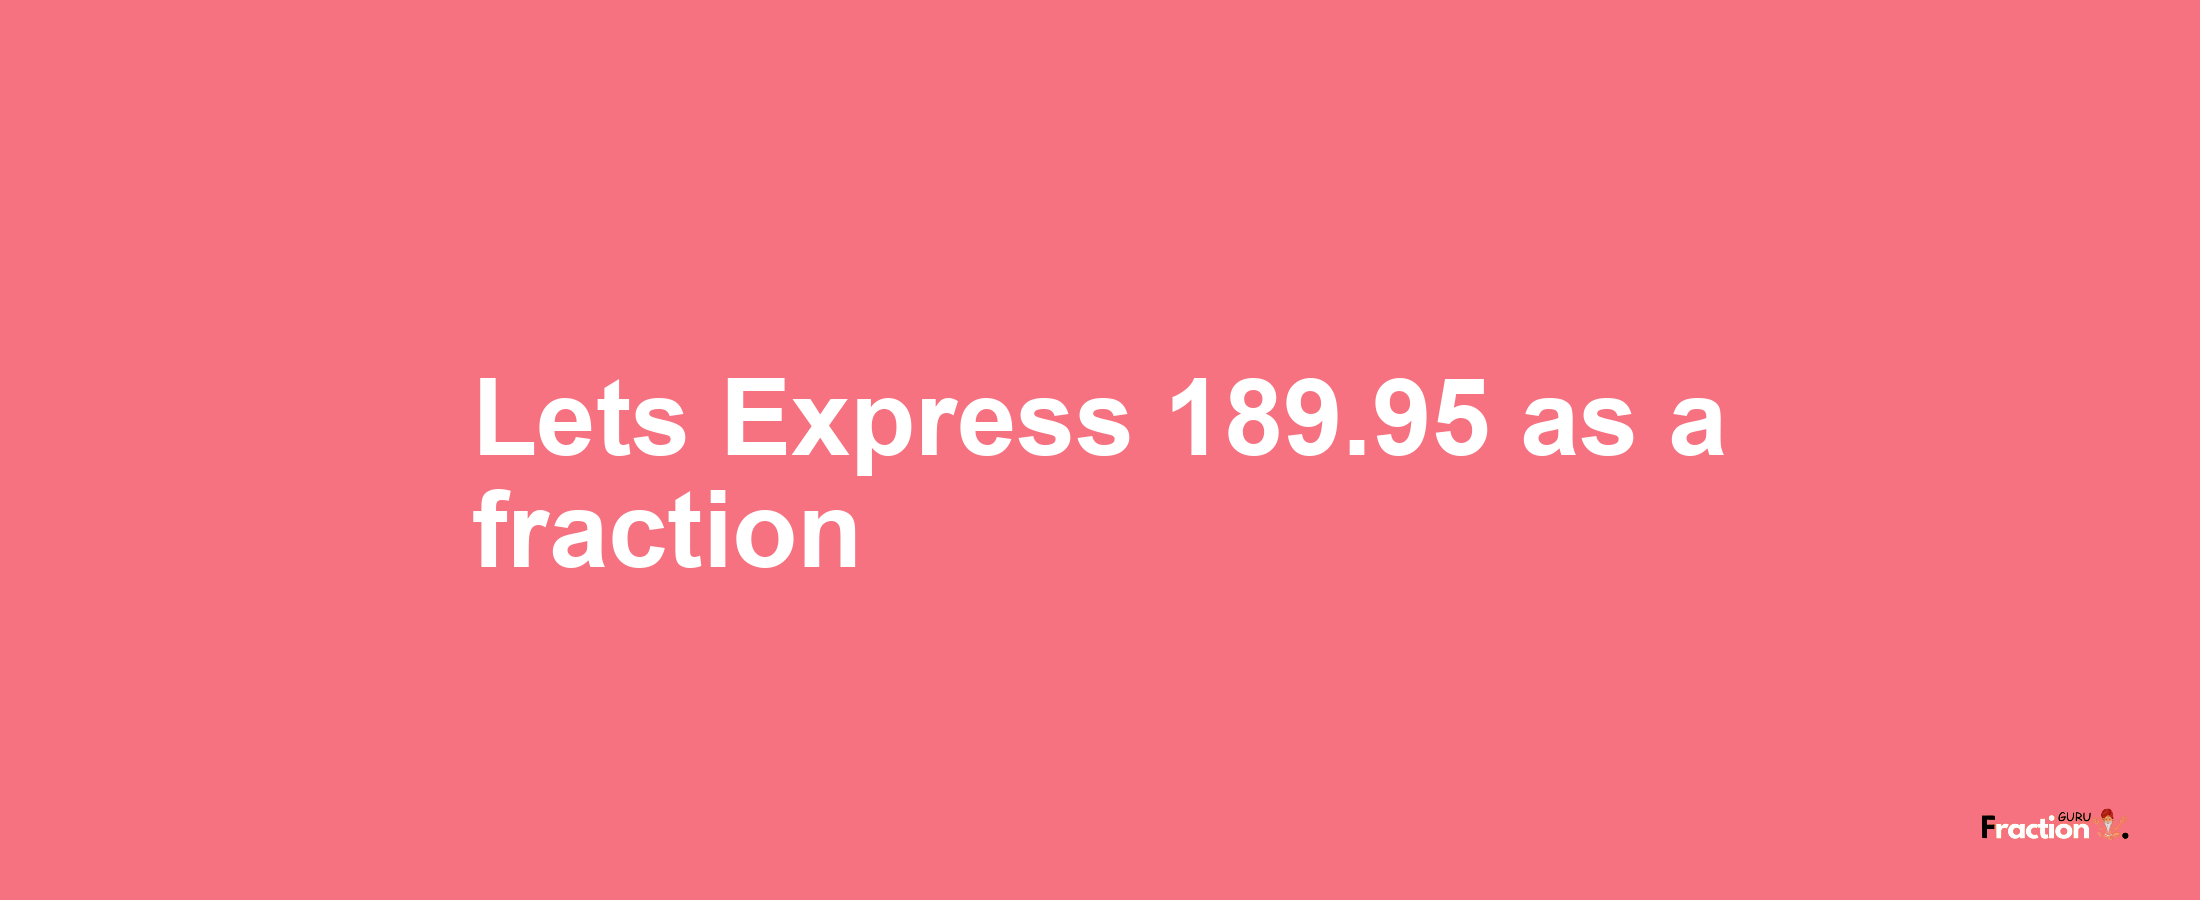 Lets Express 189.95 as afraction